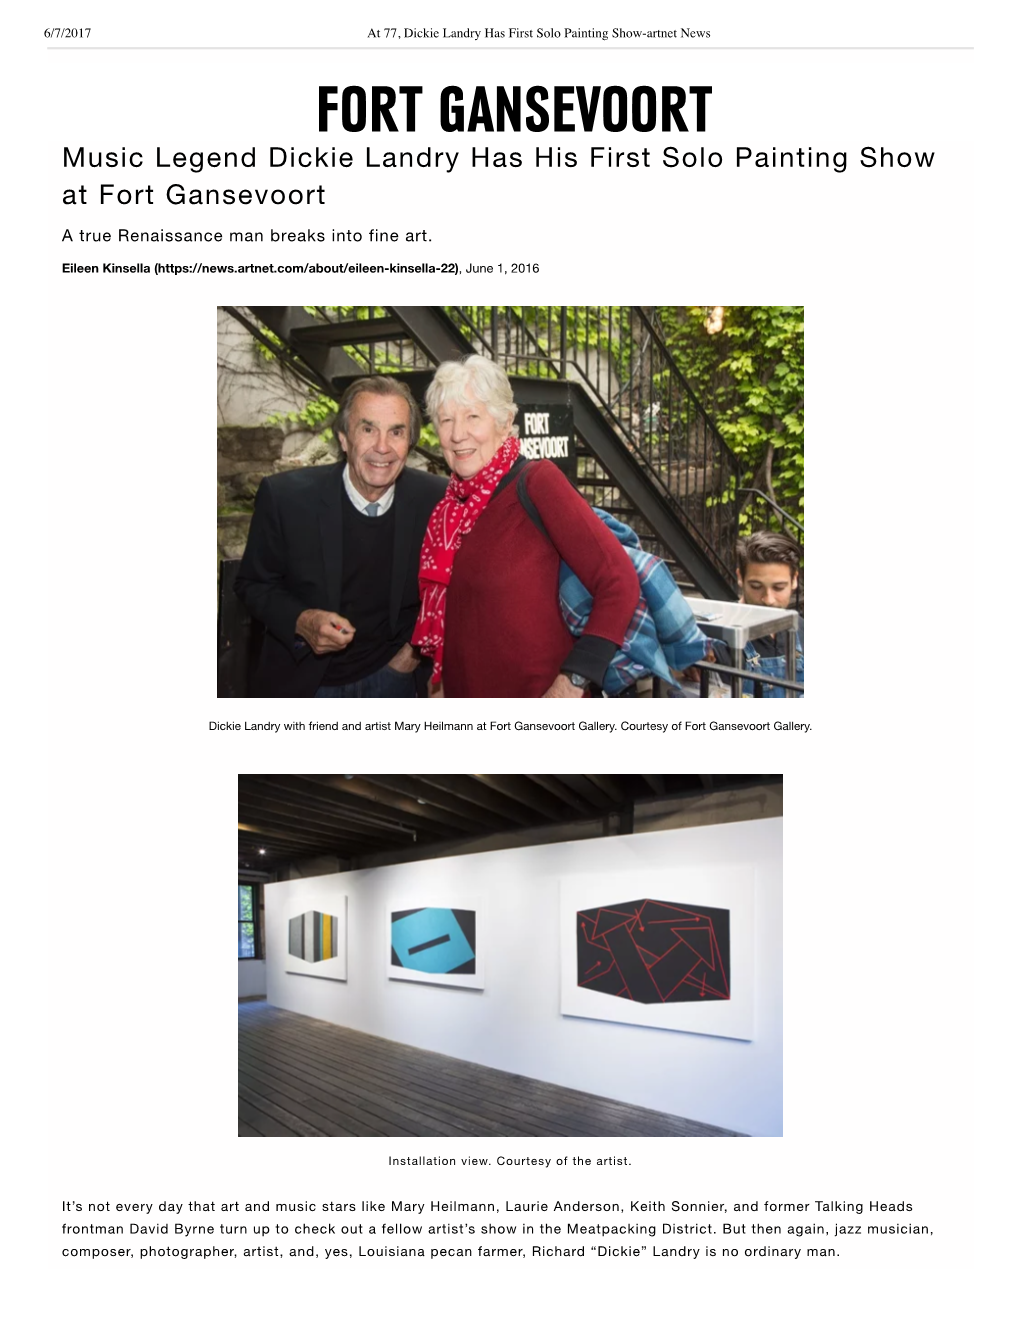 At 77, Dickie Landry Has First Solo Painting Show-Artnet News